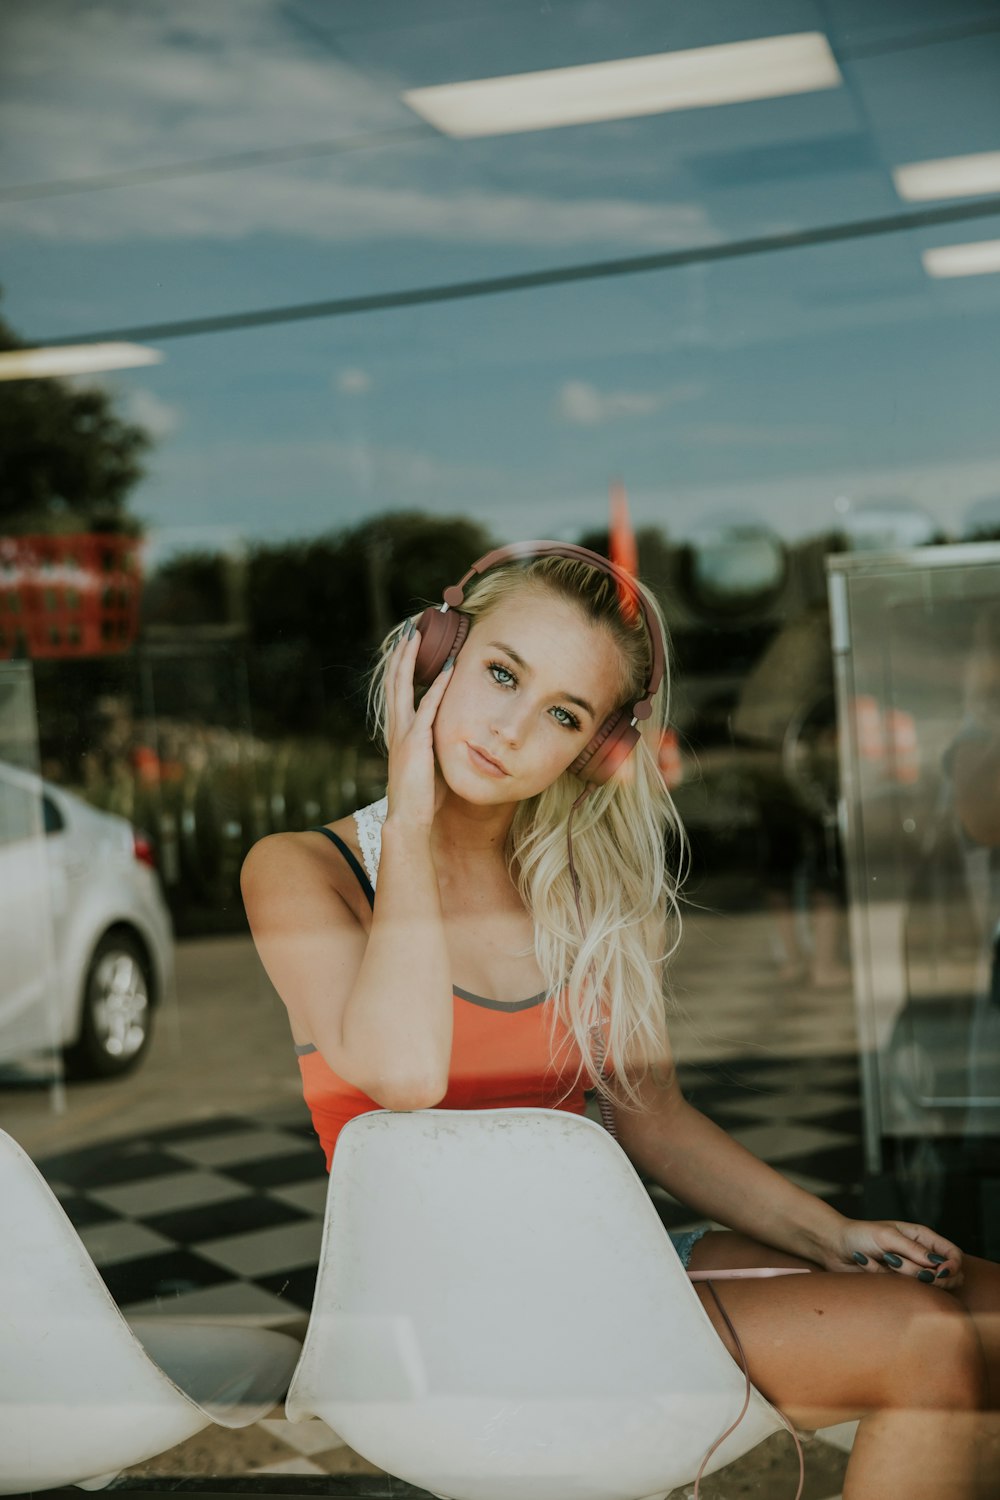 A reflection of a blonde woman in headphones behind a glass wall